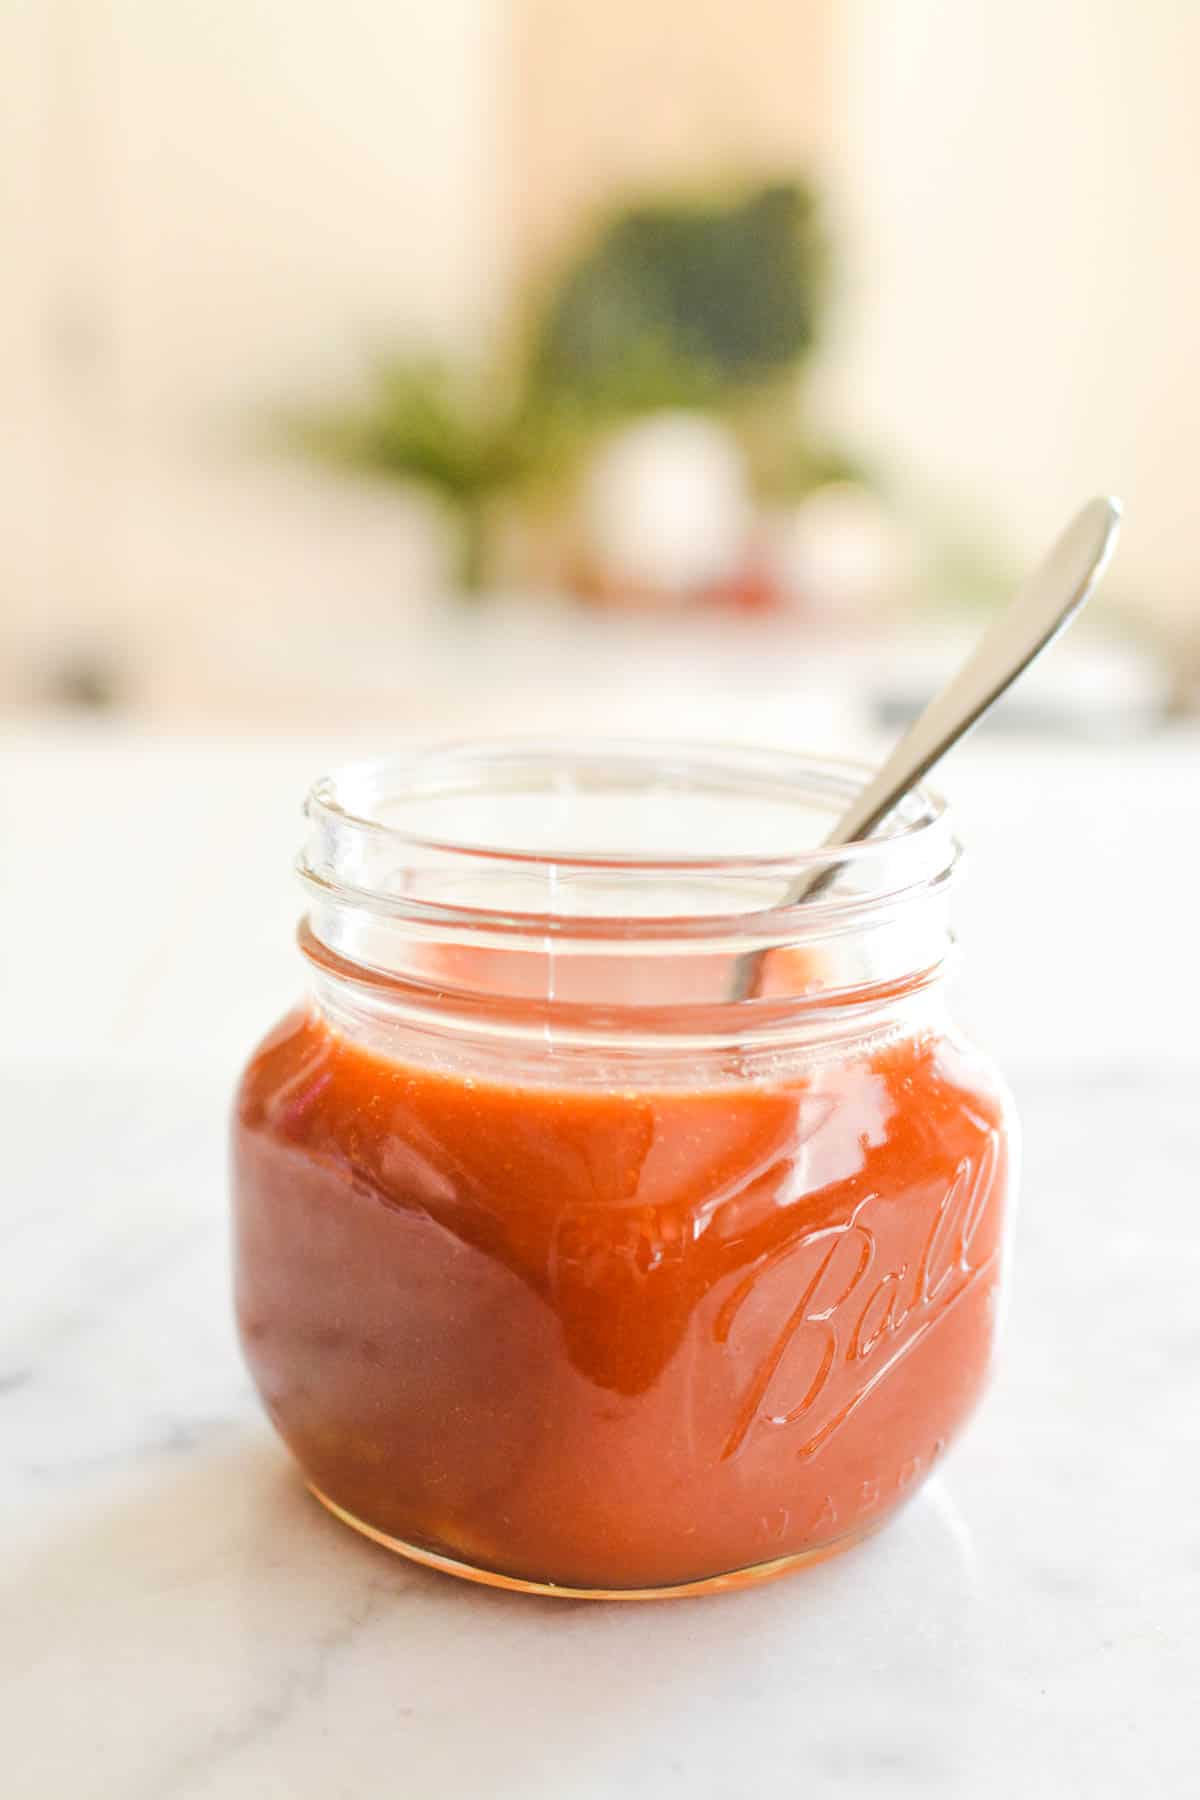 Side view of a jar of tomato juice.